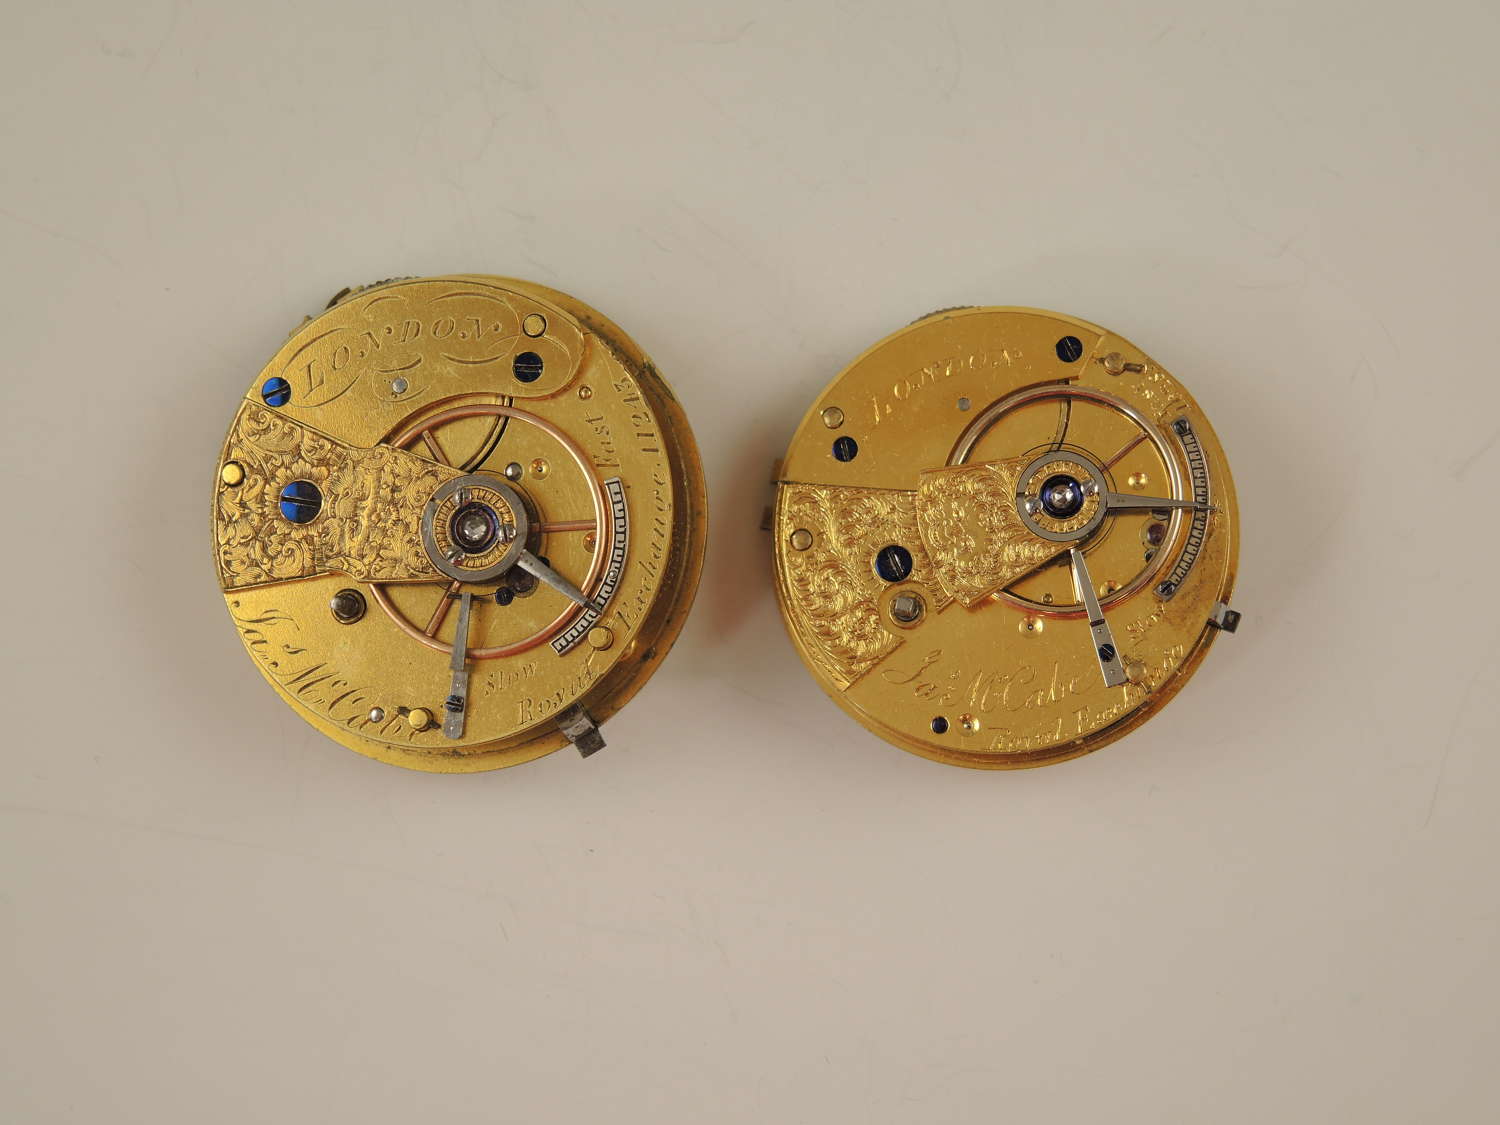 2 x fusee pocket watch movements by McCabe c1840